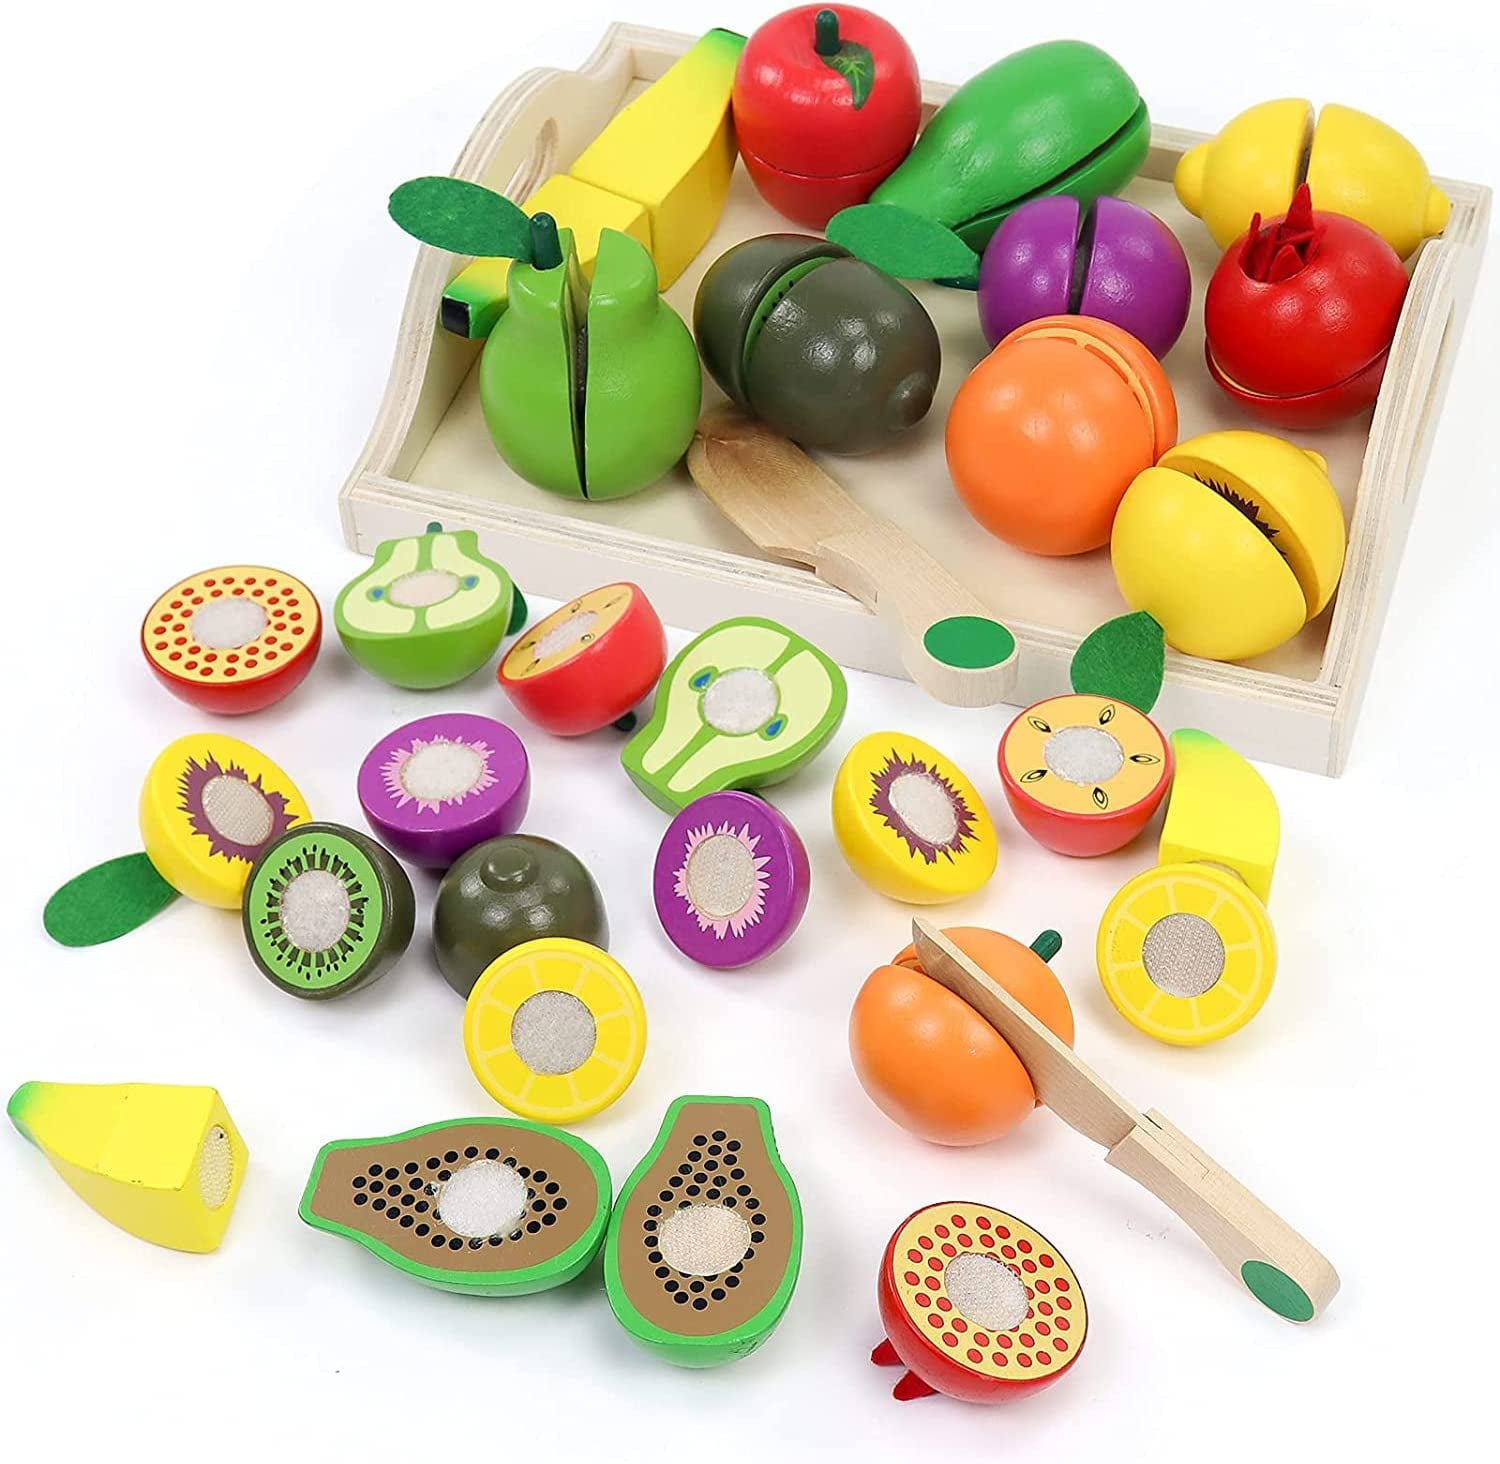 Wooden Play Food Sets for Kids Kitchen Accessories Cutting Montessori Toy  for Toddlers 1-3, Learning Educational Toys for 1 2 3 Year Old Boys Girls 